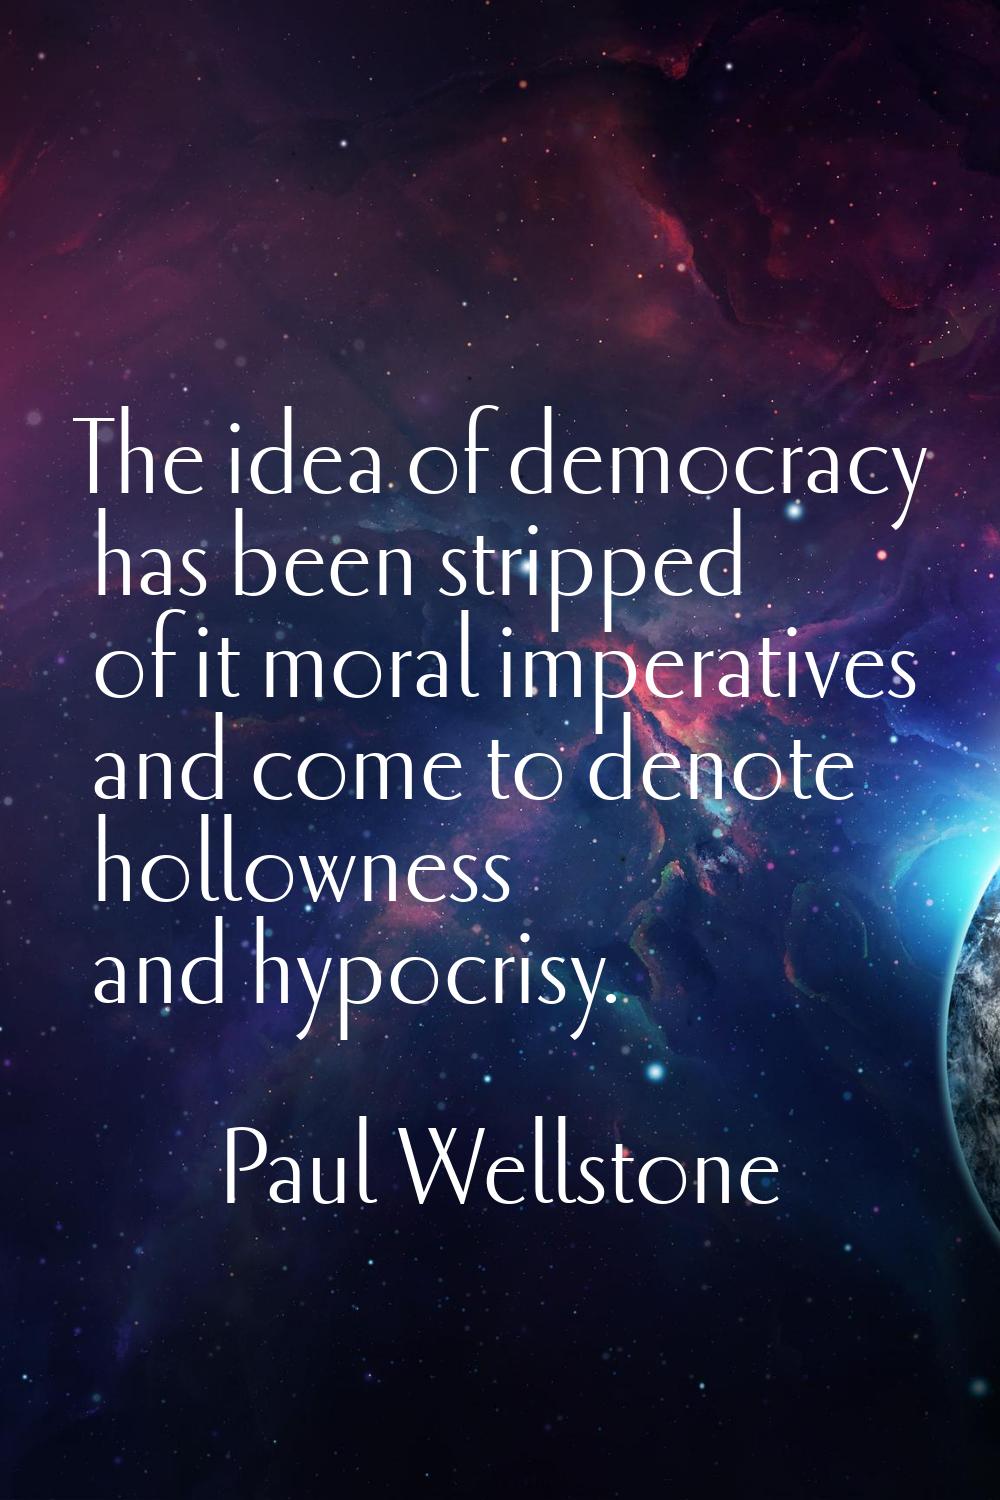 The idea of democracy has been stripped of it moral imperatives and come to denote hollowness and h